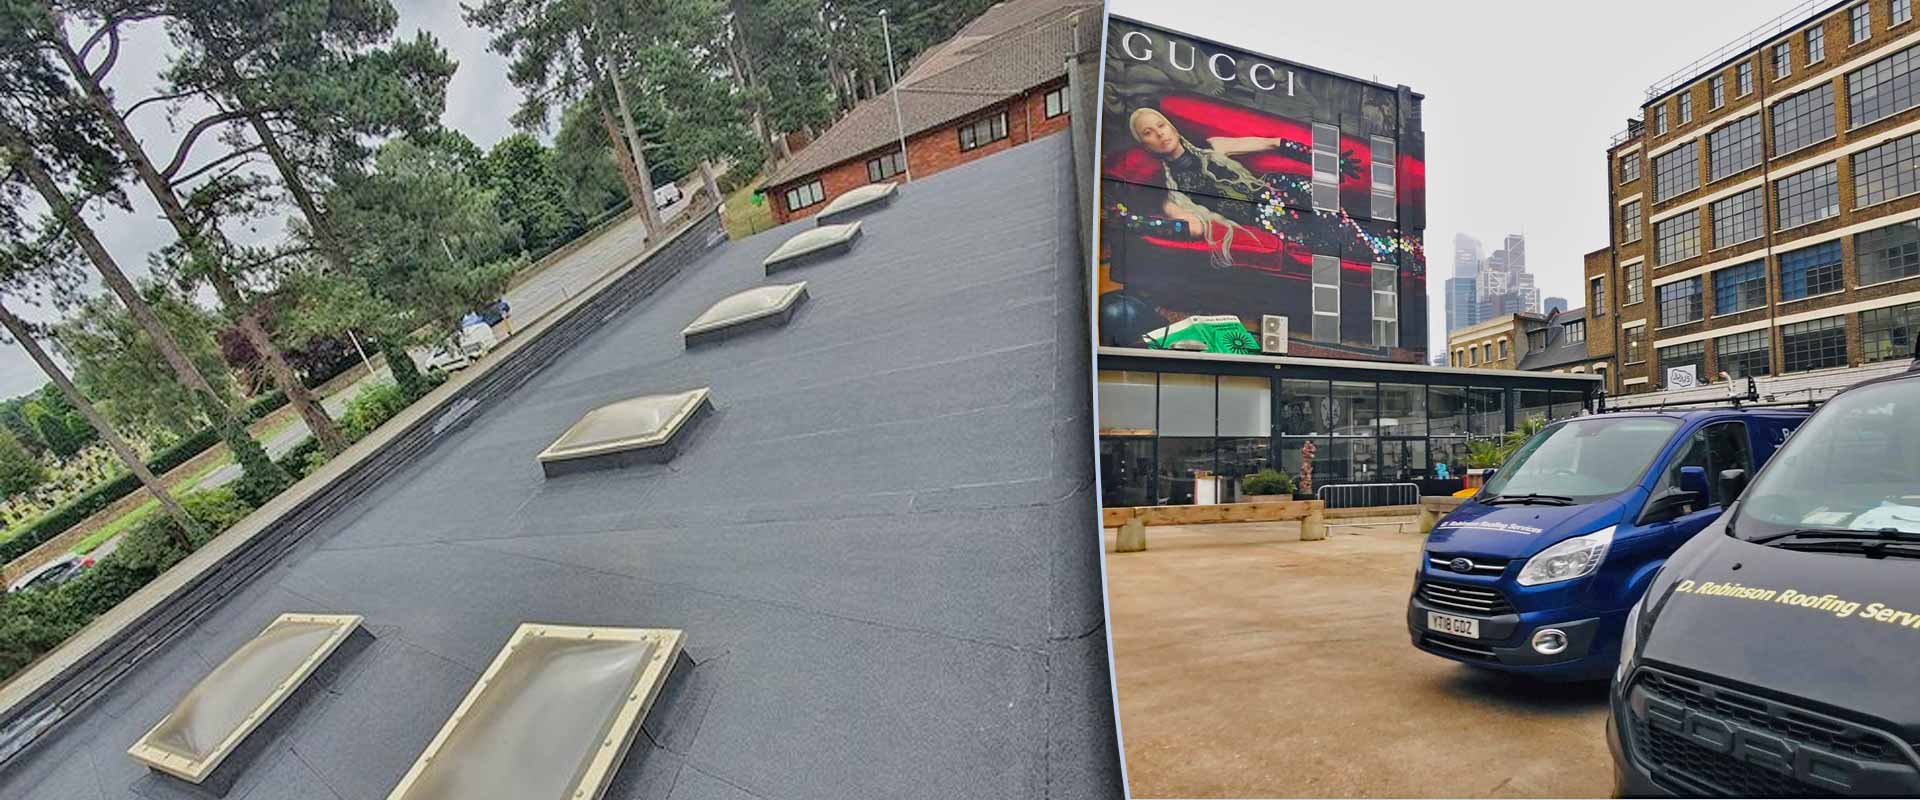 Flat Roofing Installation & Flat Roof Repairs Kettering